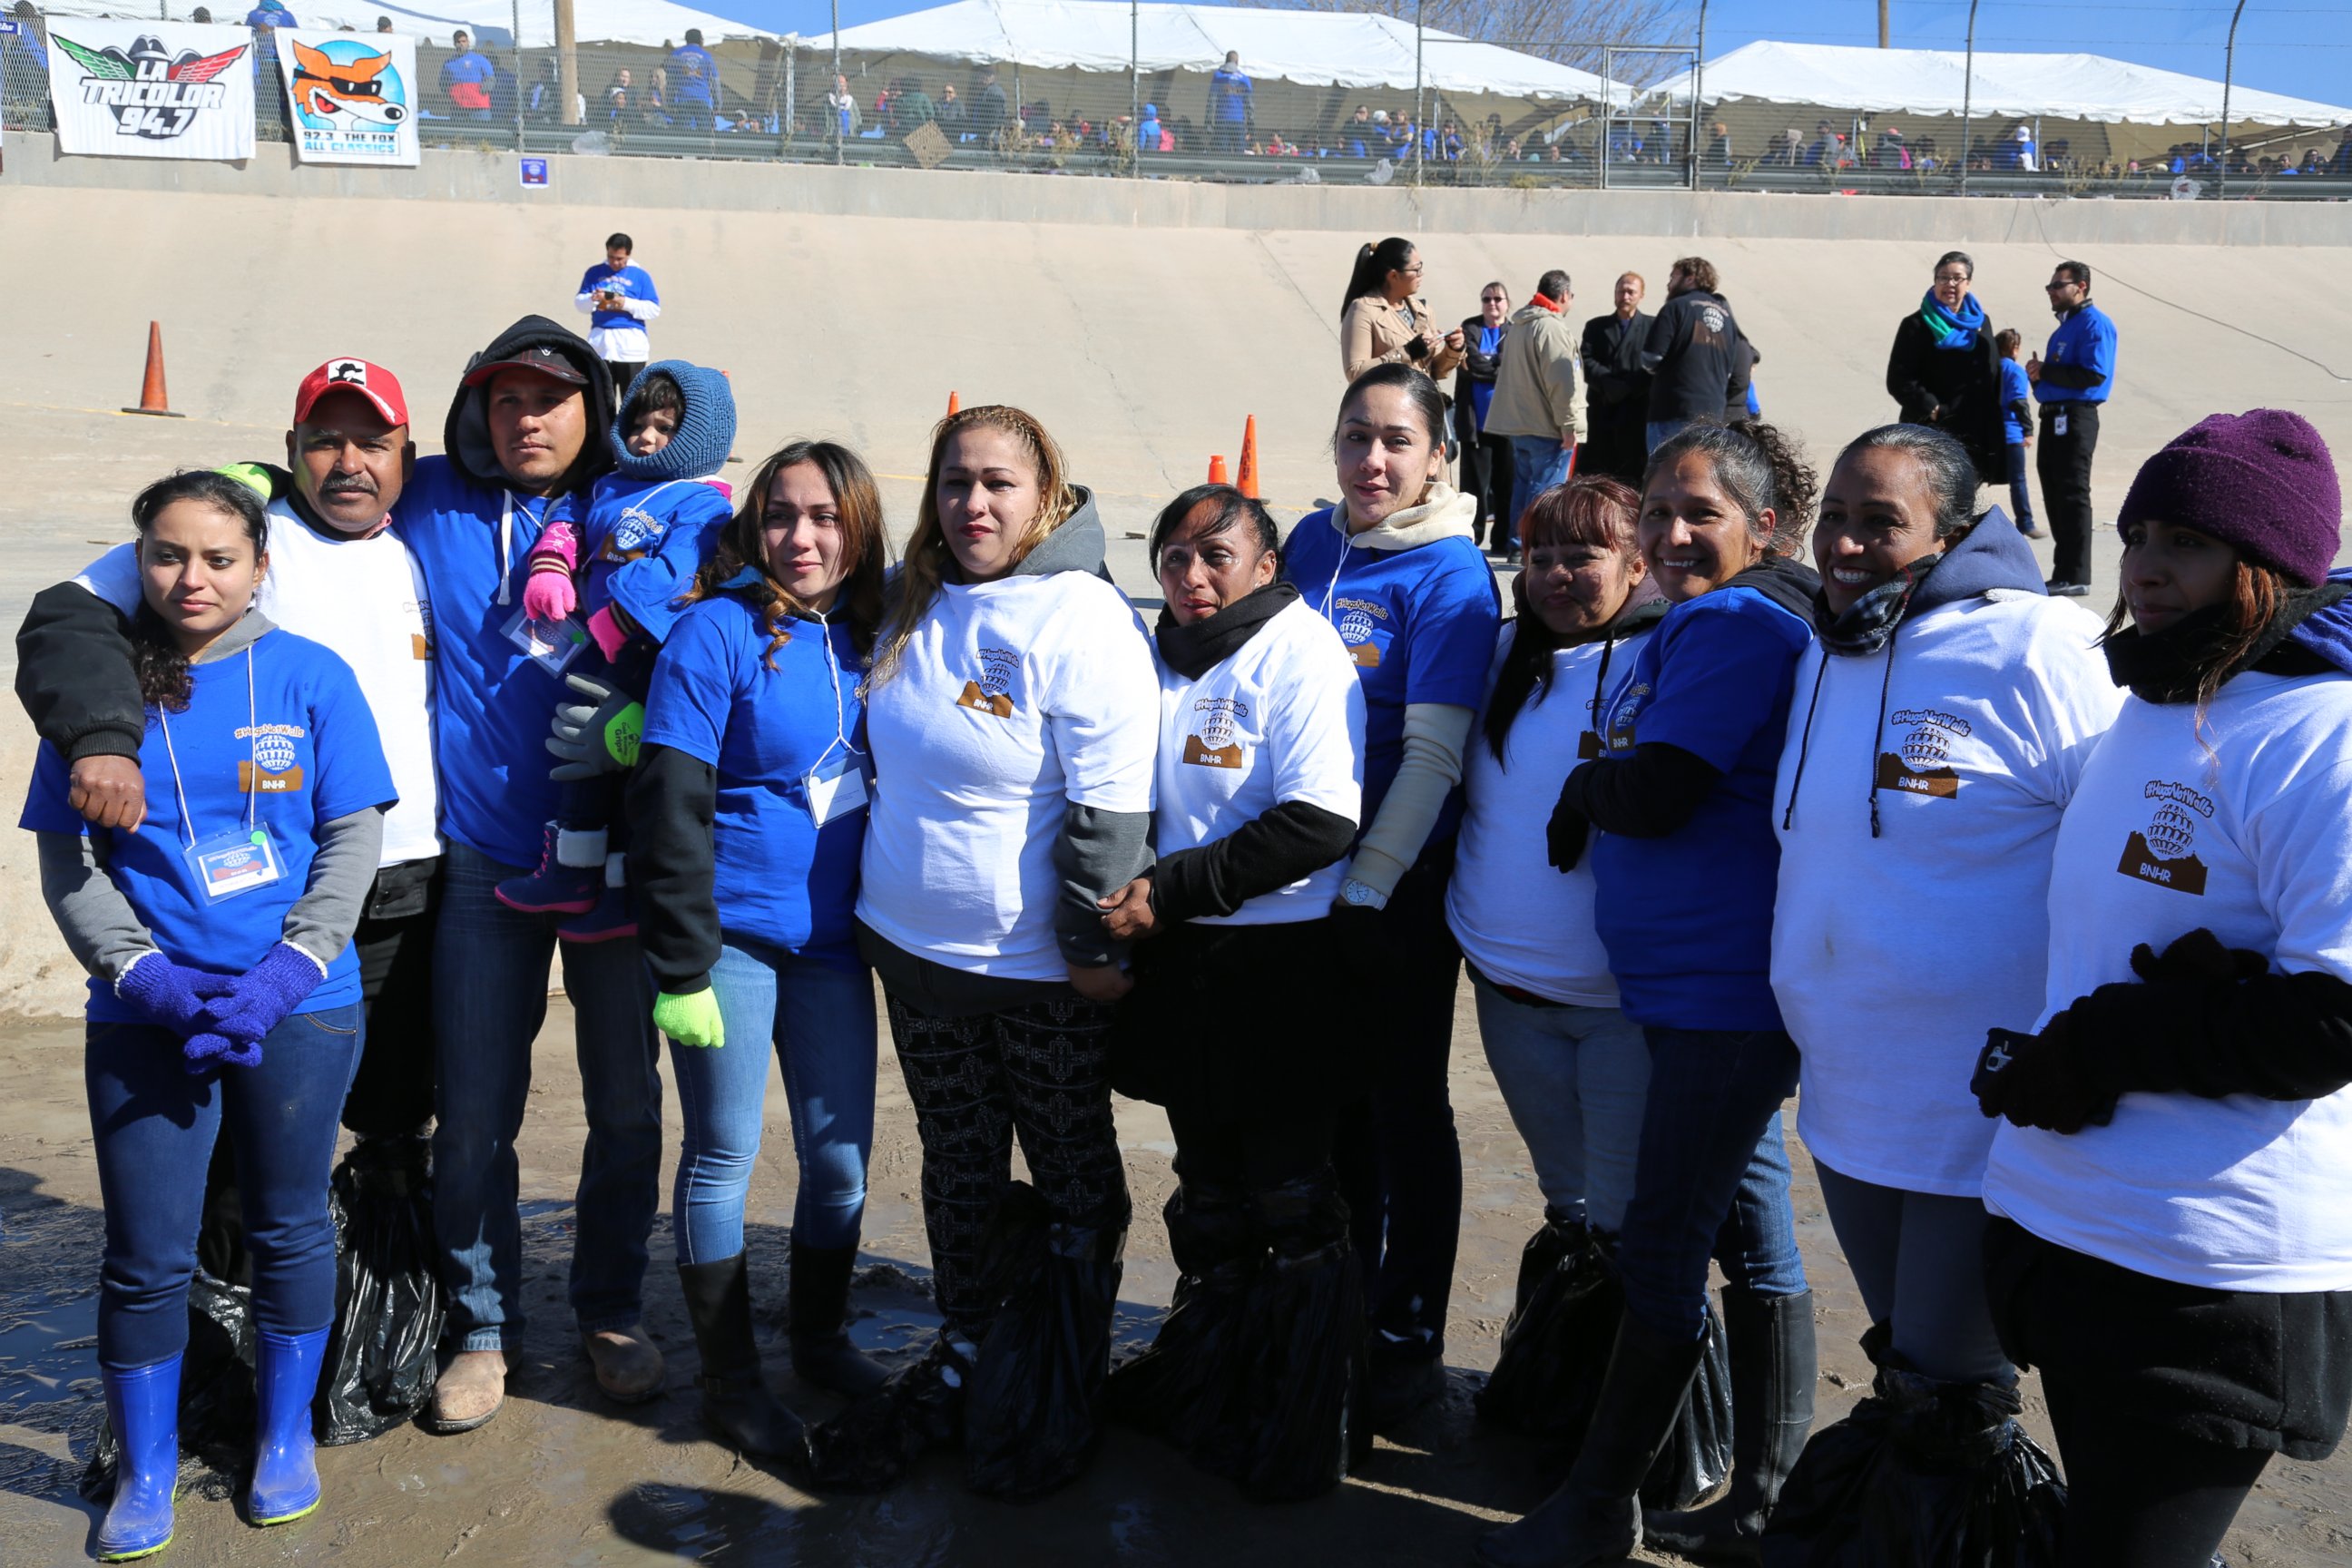 "Debora" and her reunited family are pictured here at the "Hugs Not Walls" event.